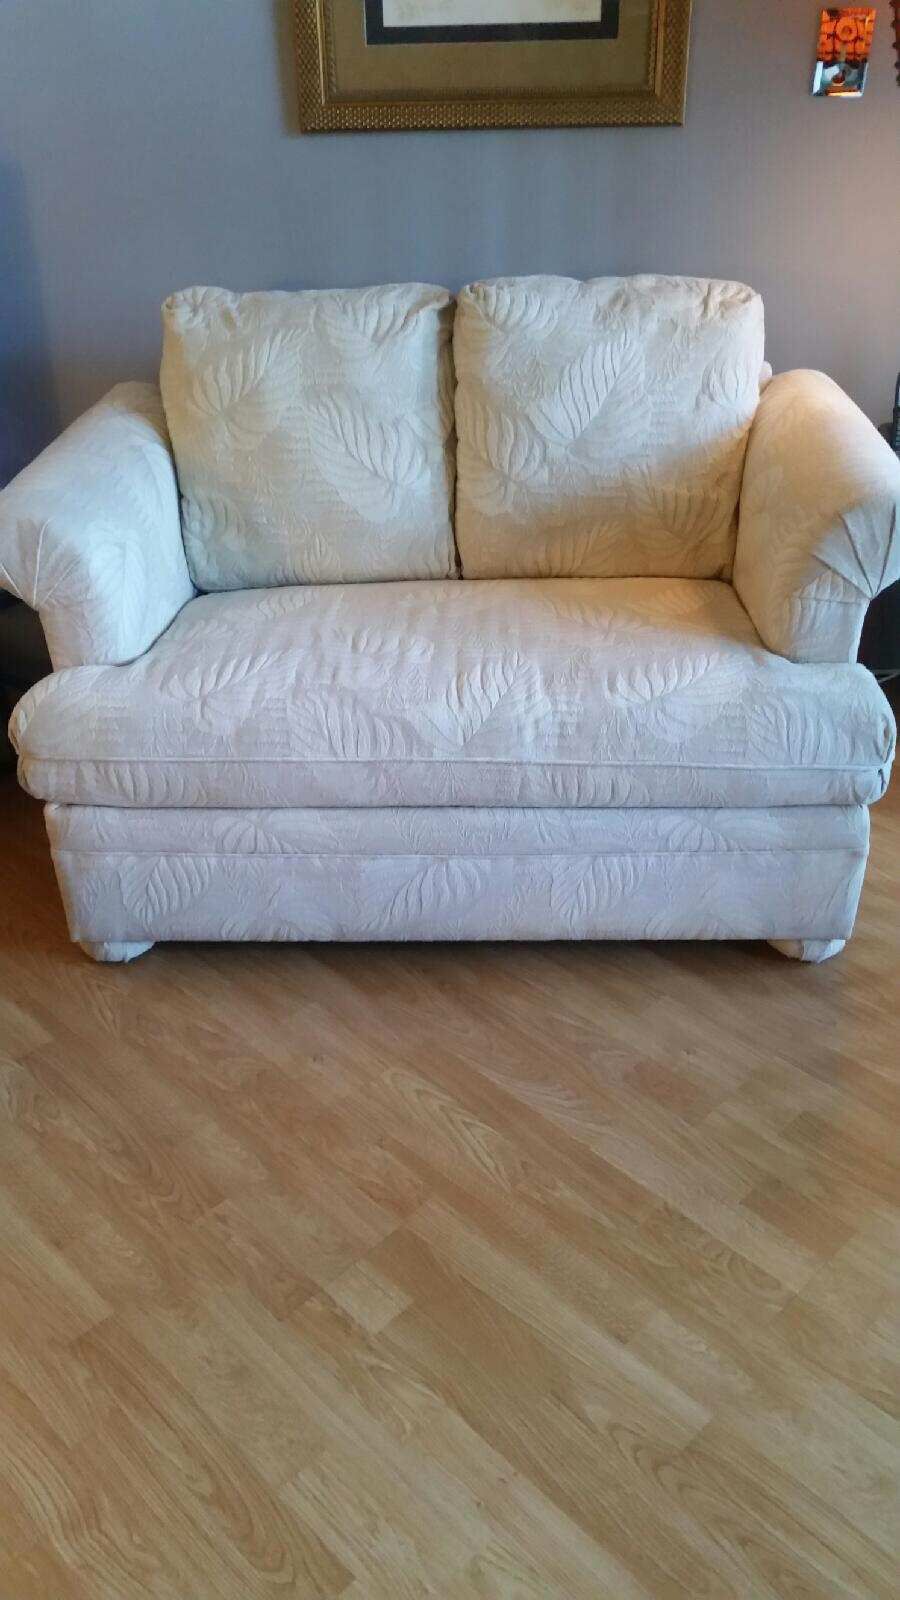 PULL OUT SOFA BED/ LOVE SEAT. GREAT CONDITION. MATTRESS STILL WRAPPED IN PLASTIC